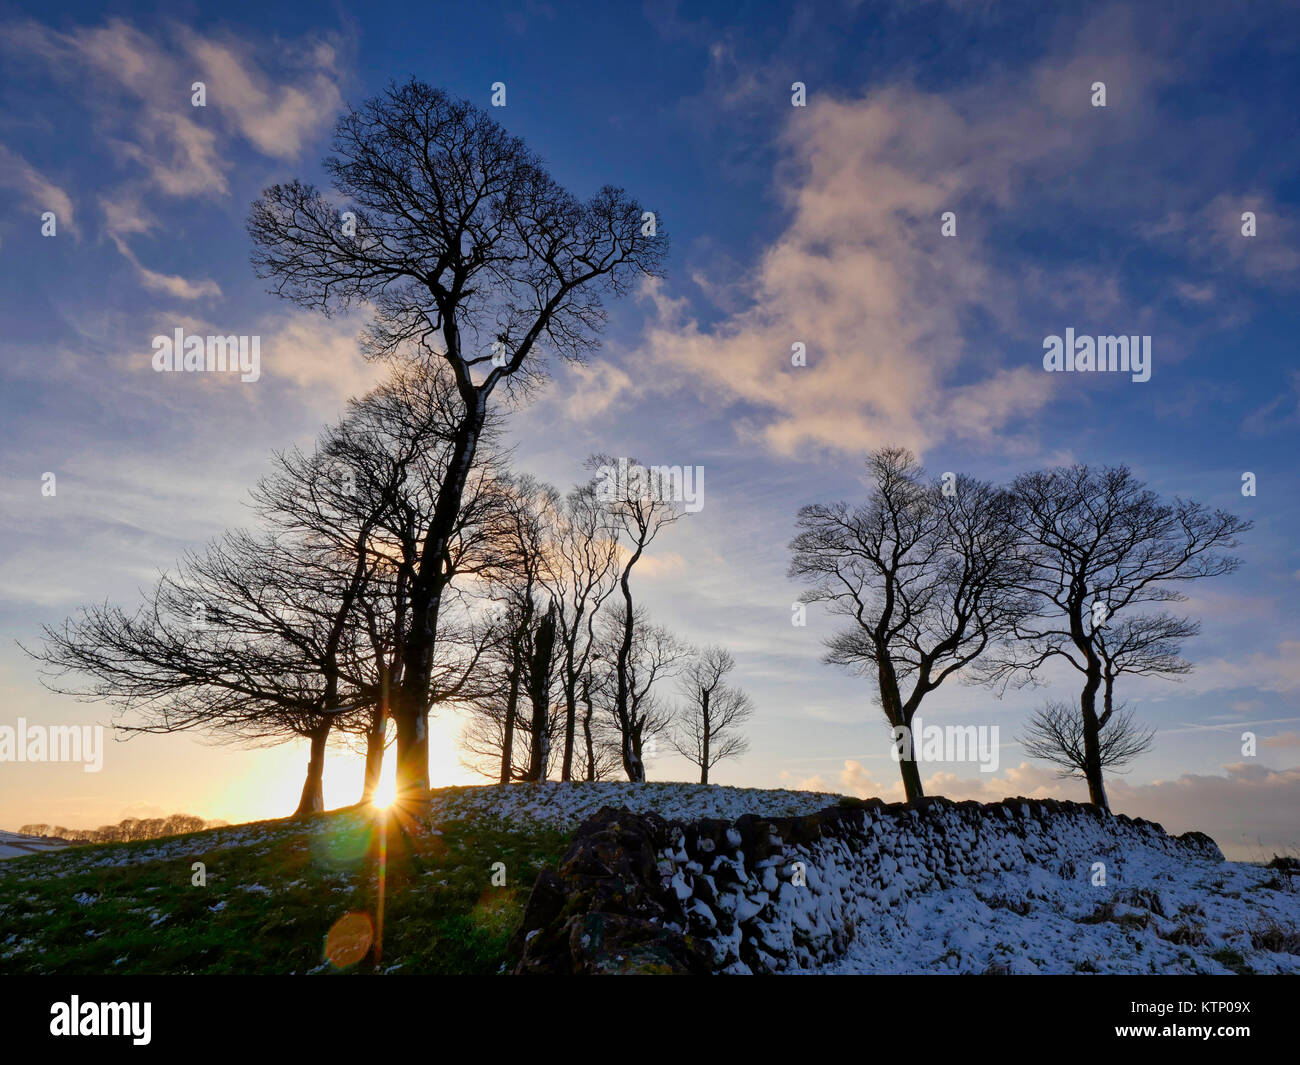 Moat Low, Derbyshire. 28th Dec, 2017. UK Weather: Moat Low Derbyshire spectacular sunset over the snow capped Bronze Age Round Barrow near Tissington in the Peak District National Park Credit: Doug Blane/Alamy Live News Stock Photo